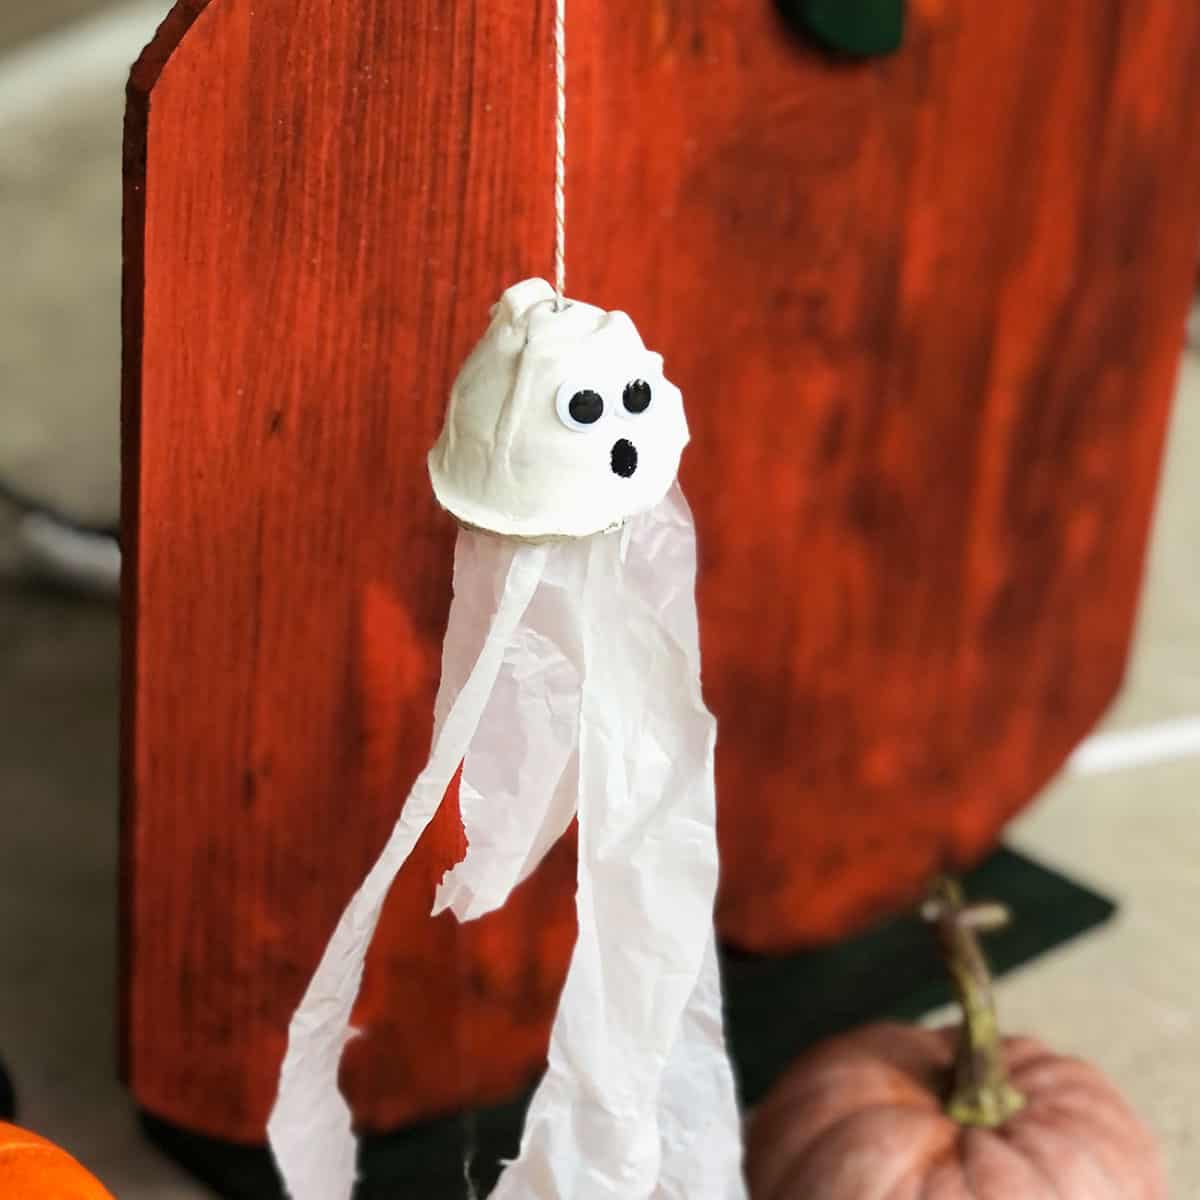 A ghost craft made from an egg carton and plastic bag.